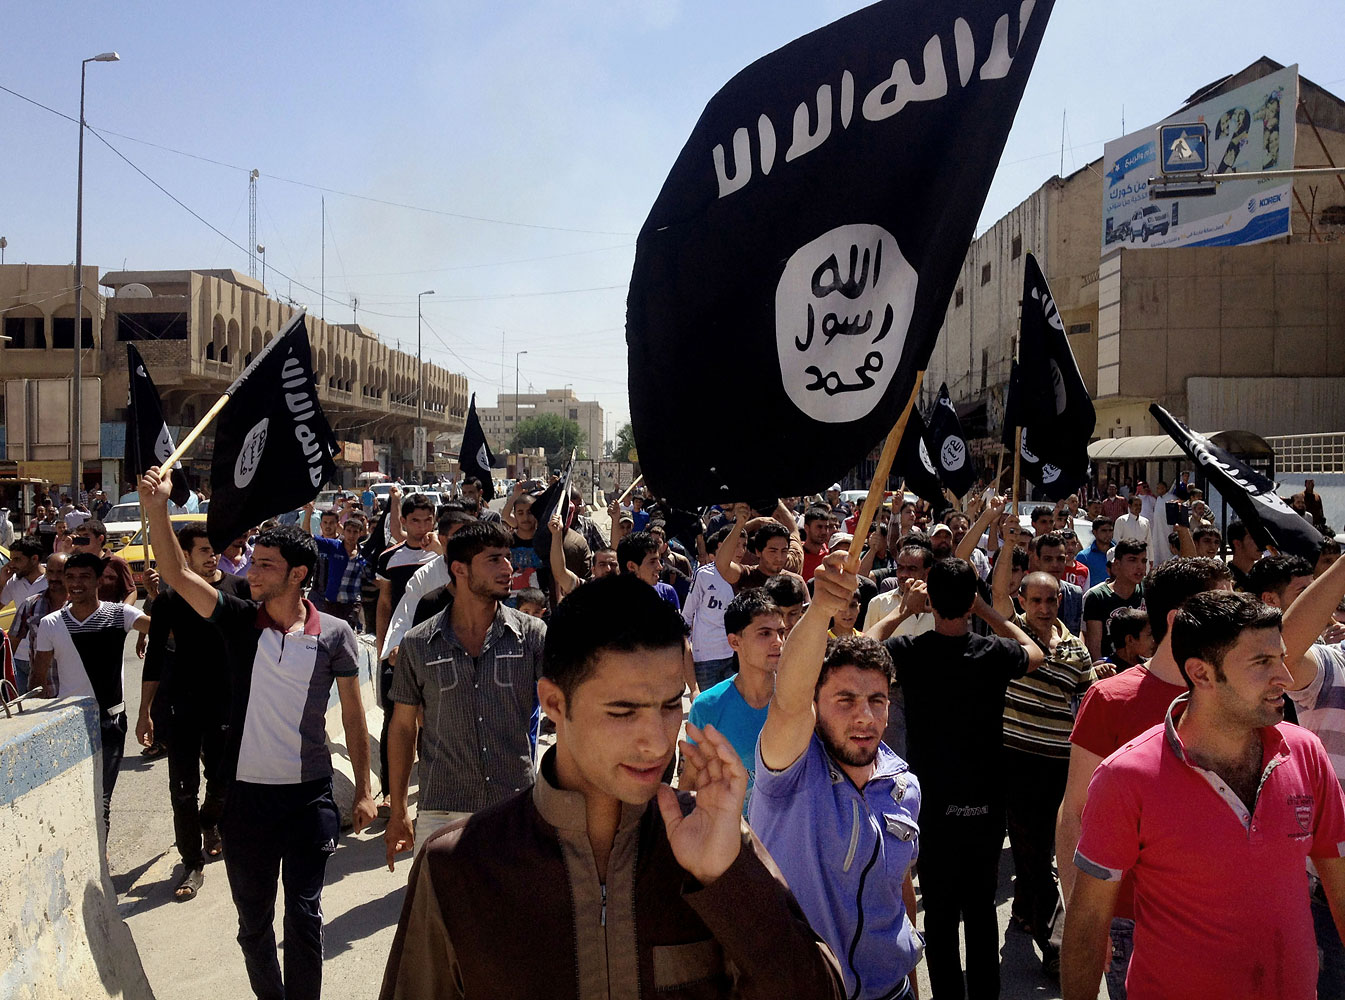 Demonstrators carry the Islamic State of Iraq and Syria's flags in the Iraqi city of Mosul, 360 km (225 miles) northwest of Baghdad, on June 16, 2014